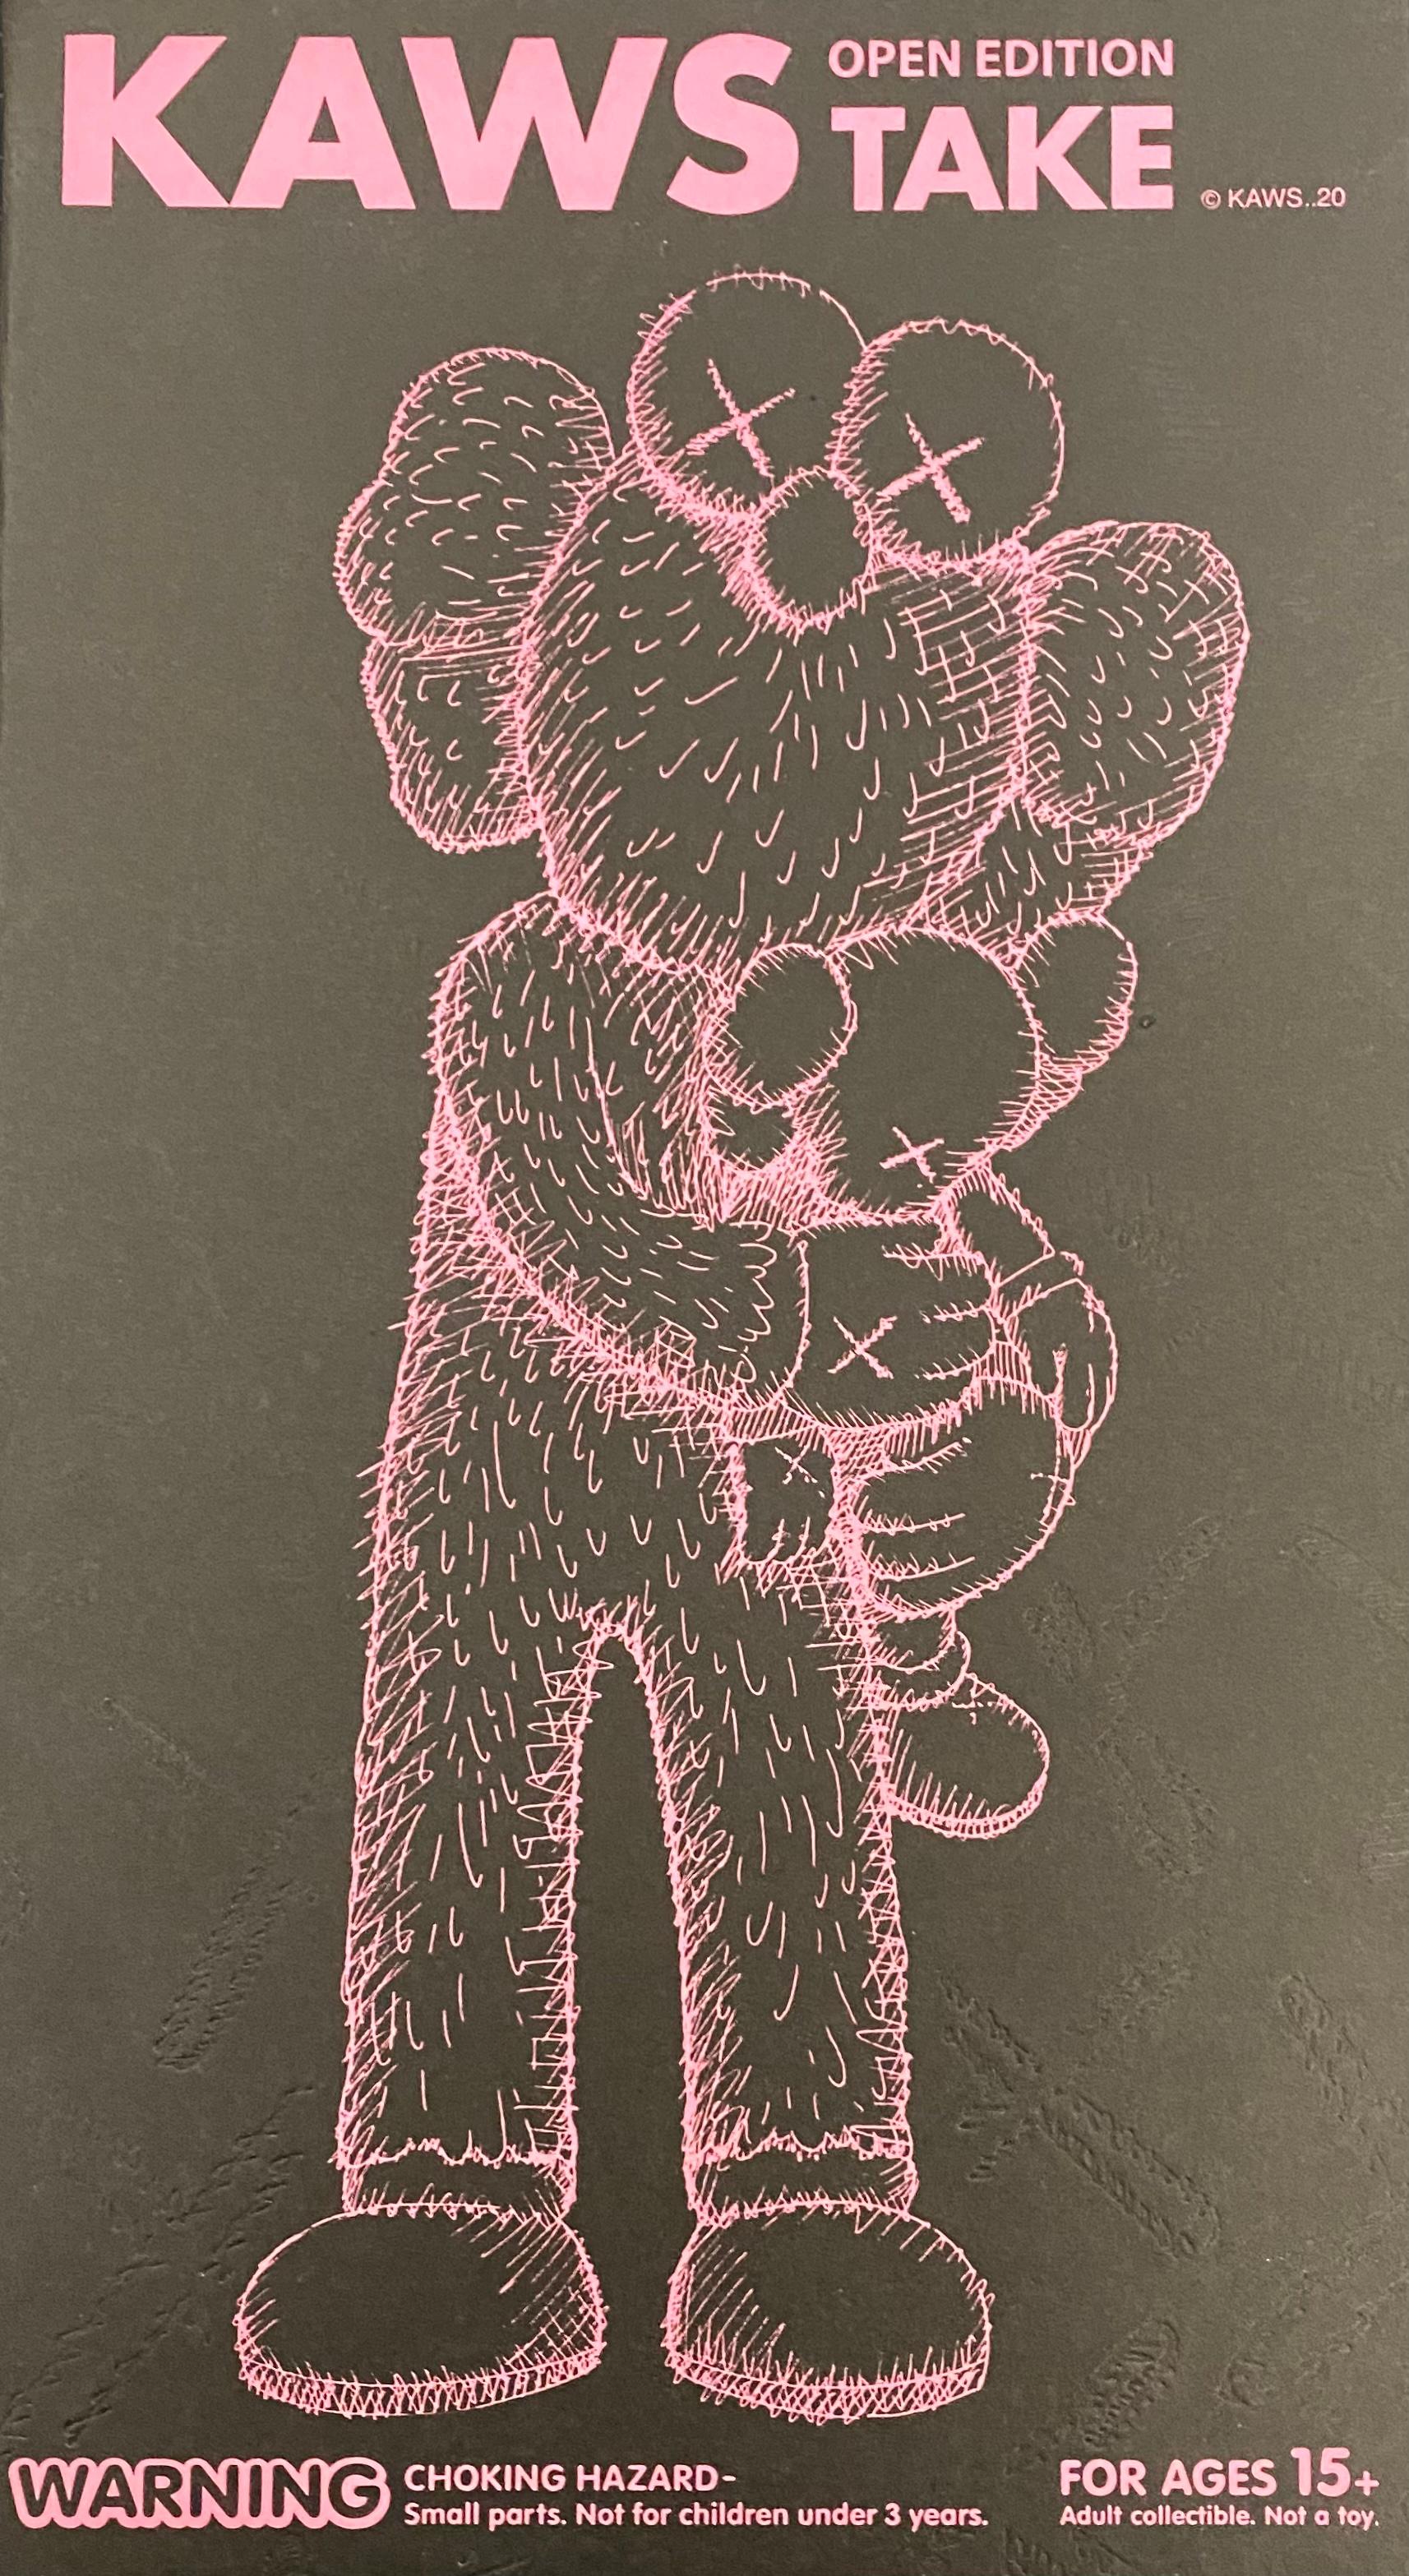 KAWS TAKE (Black) new & unopened in its original packaging. 
A standout KAWS Companion figure and variation of KAWS' large scale TAKE sculpture - a key highlight of the exhibition, 'KAWS BLACKOUT’ at Skarstedt Gallery London in 2019 - the first